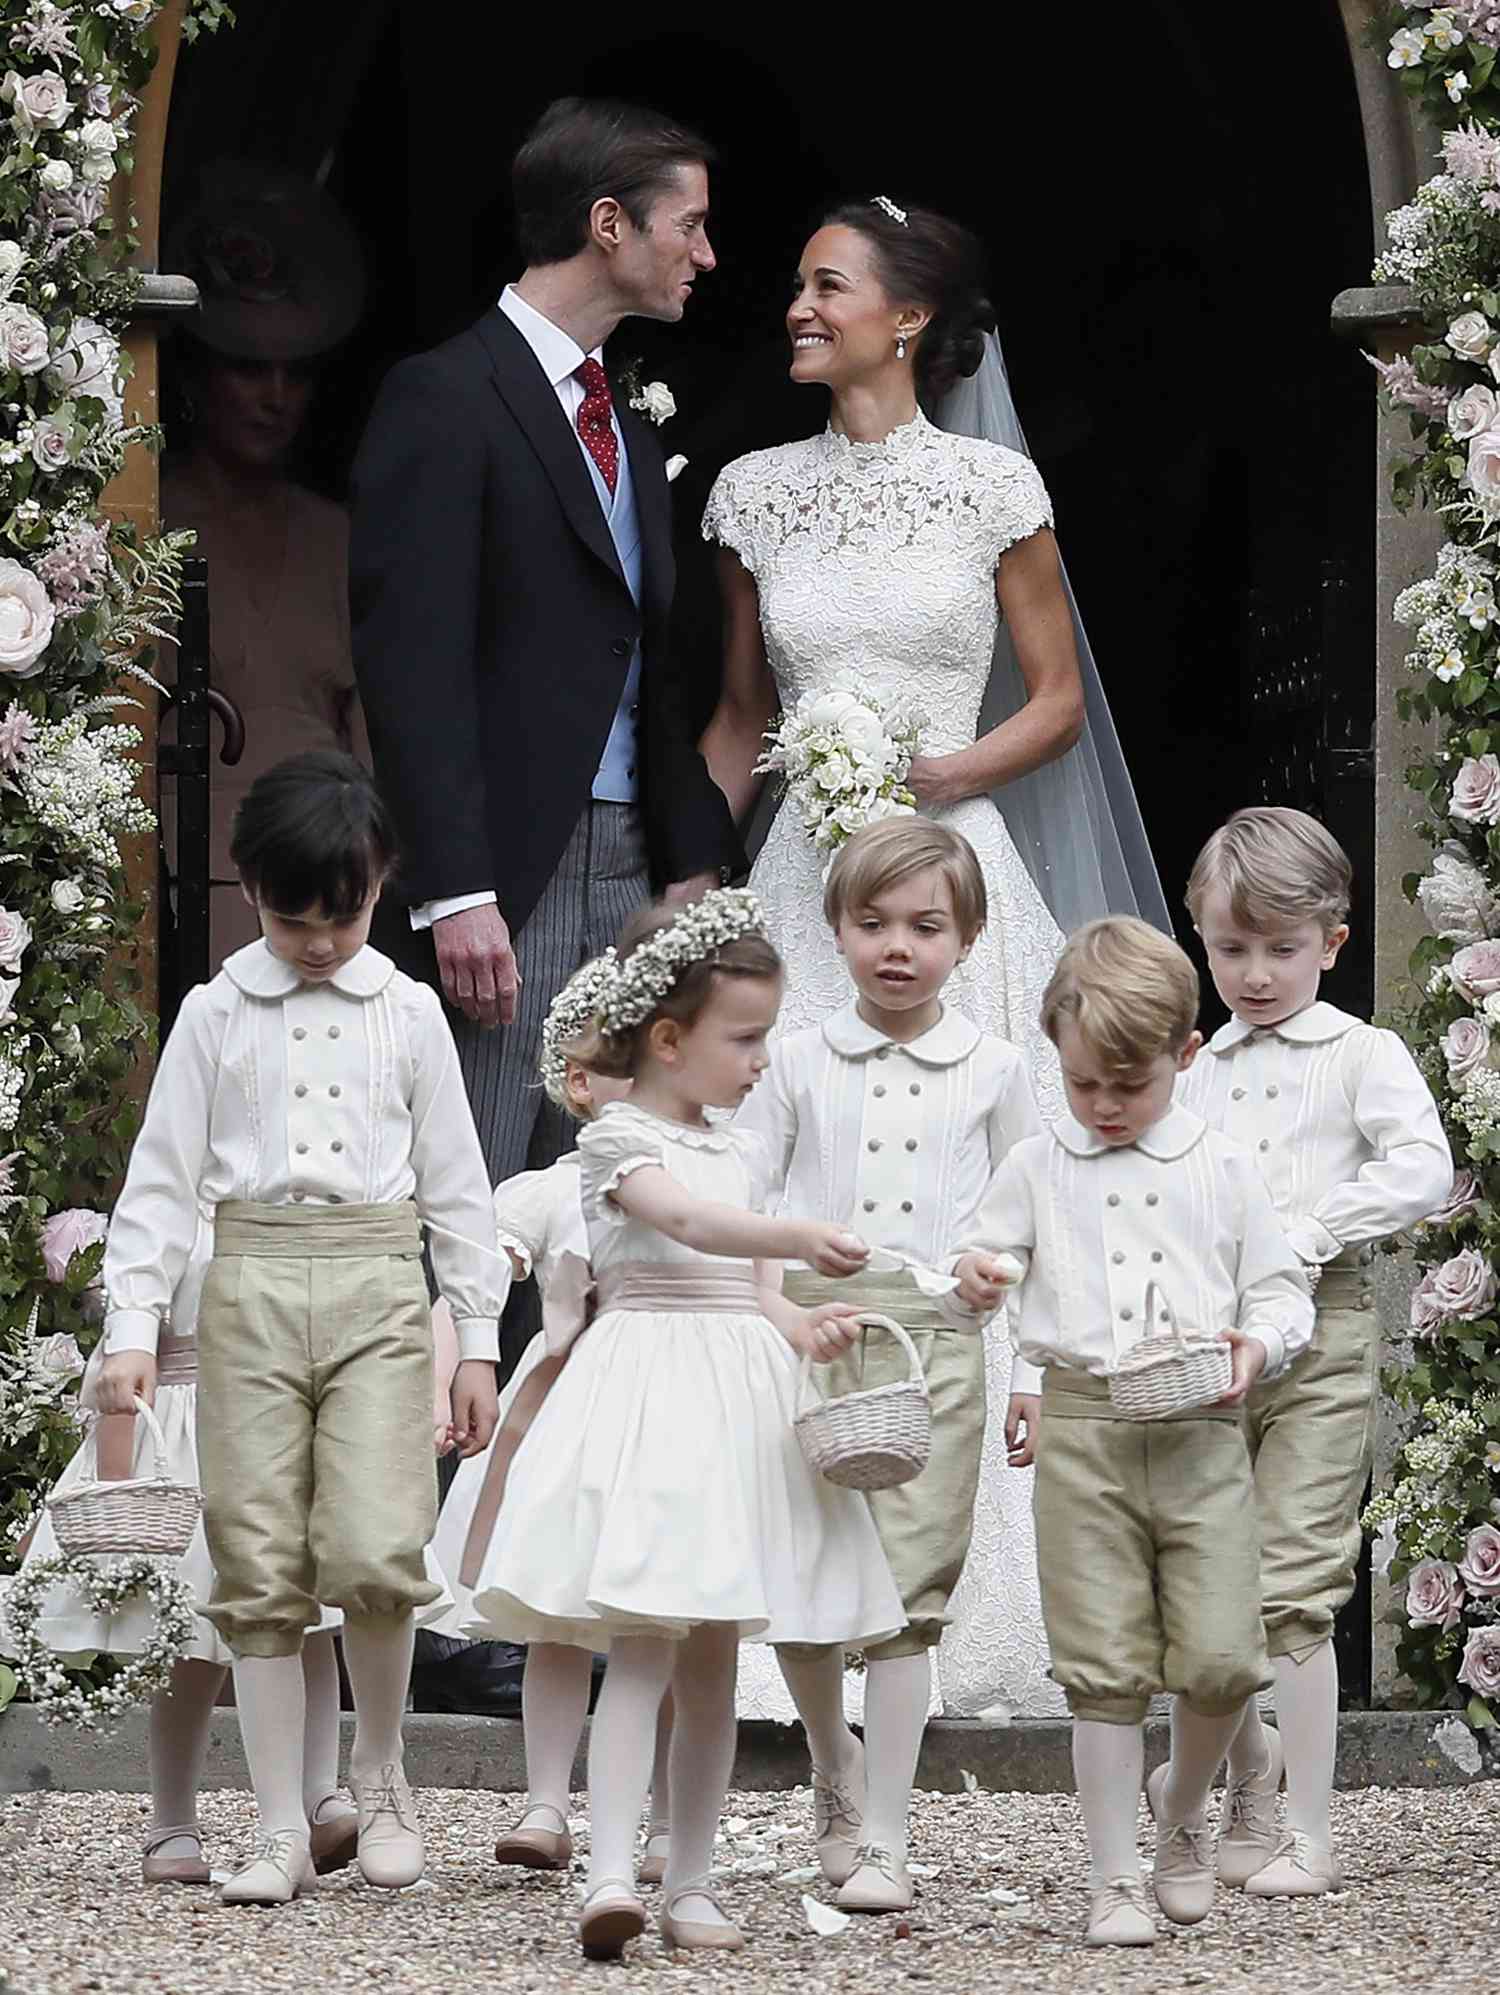 #3 Pippa Middle and James Matthews' Kid Bridal Party